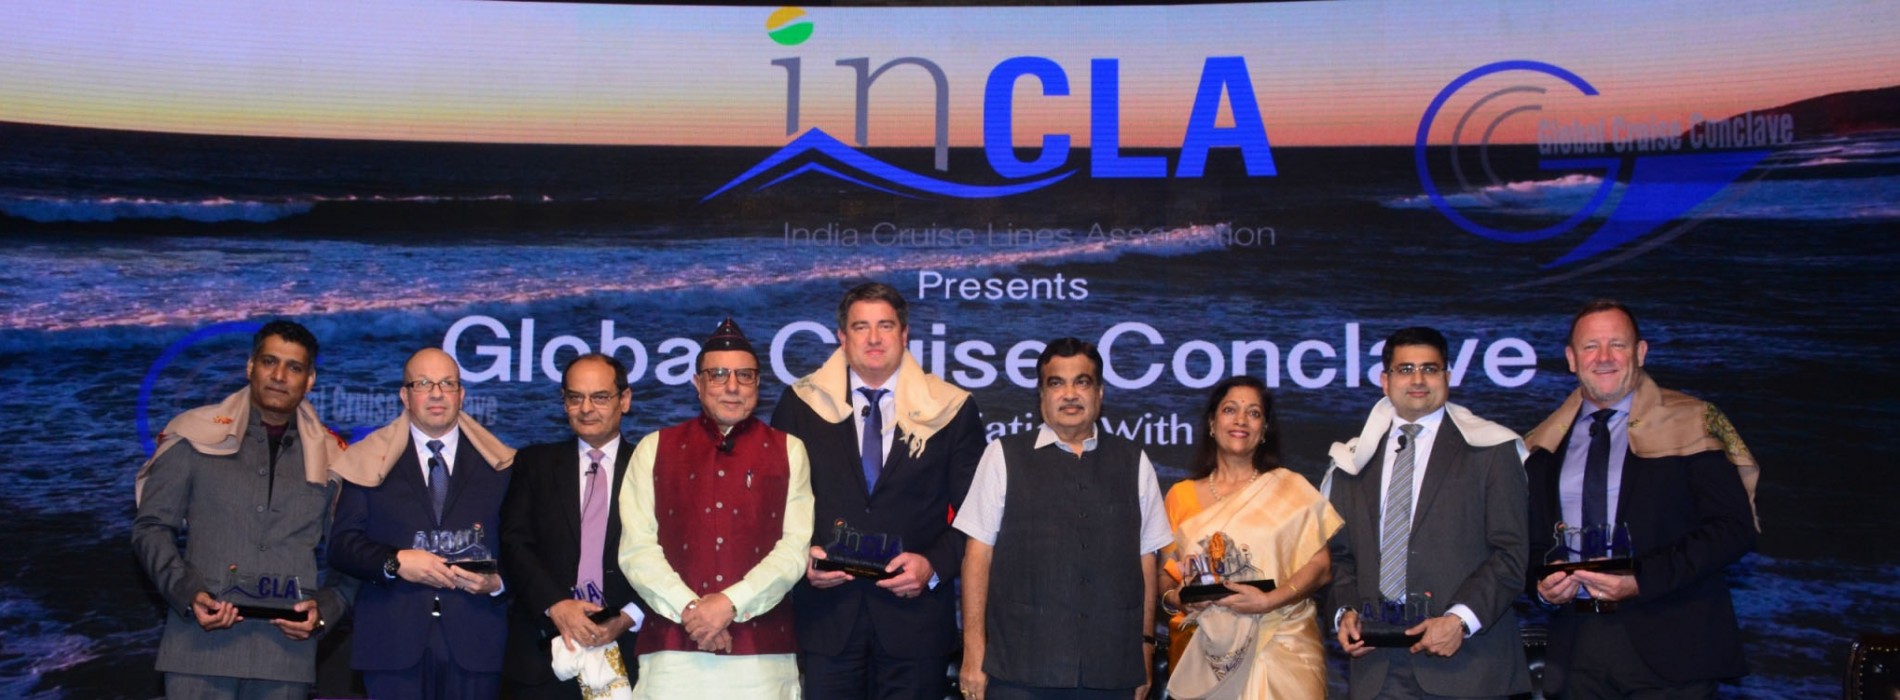 India Cruise Lines Association presents White Paper on “Recommendations for Indian Cruise Industry”